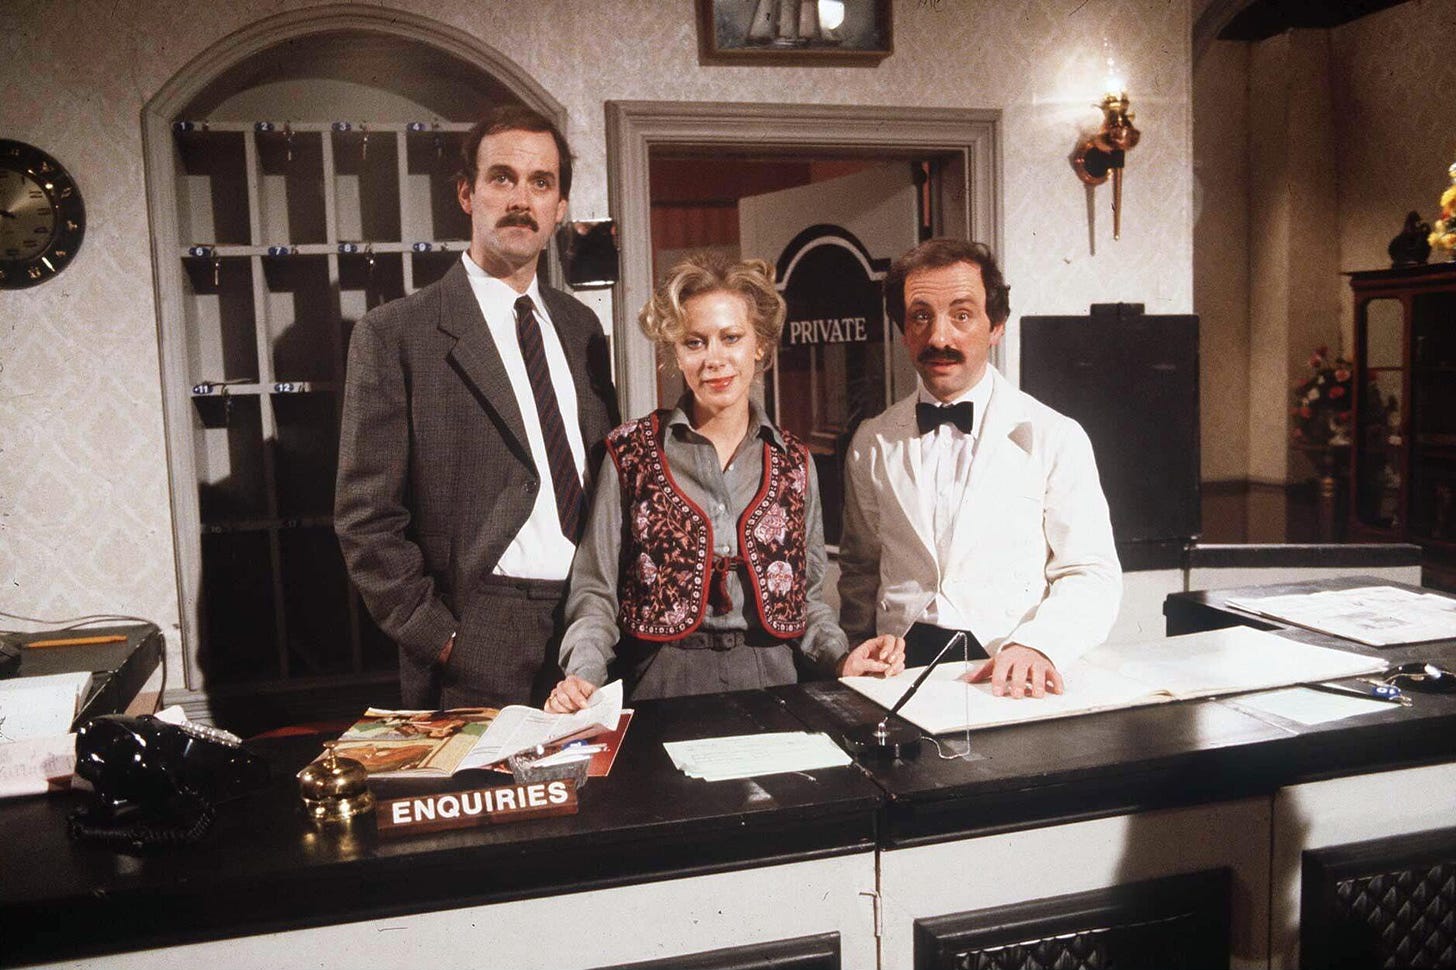 John Cleese to Reboot 'Fawlty Towers' With His Daughter Camilla Cleese -  The New York Times